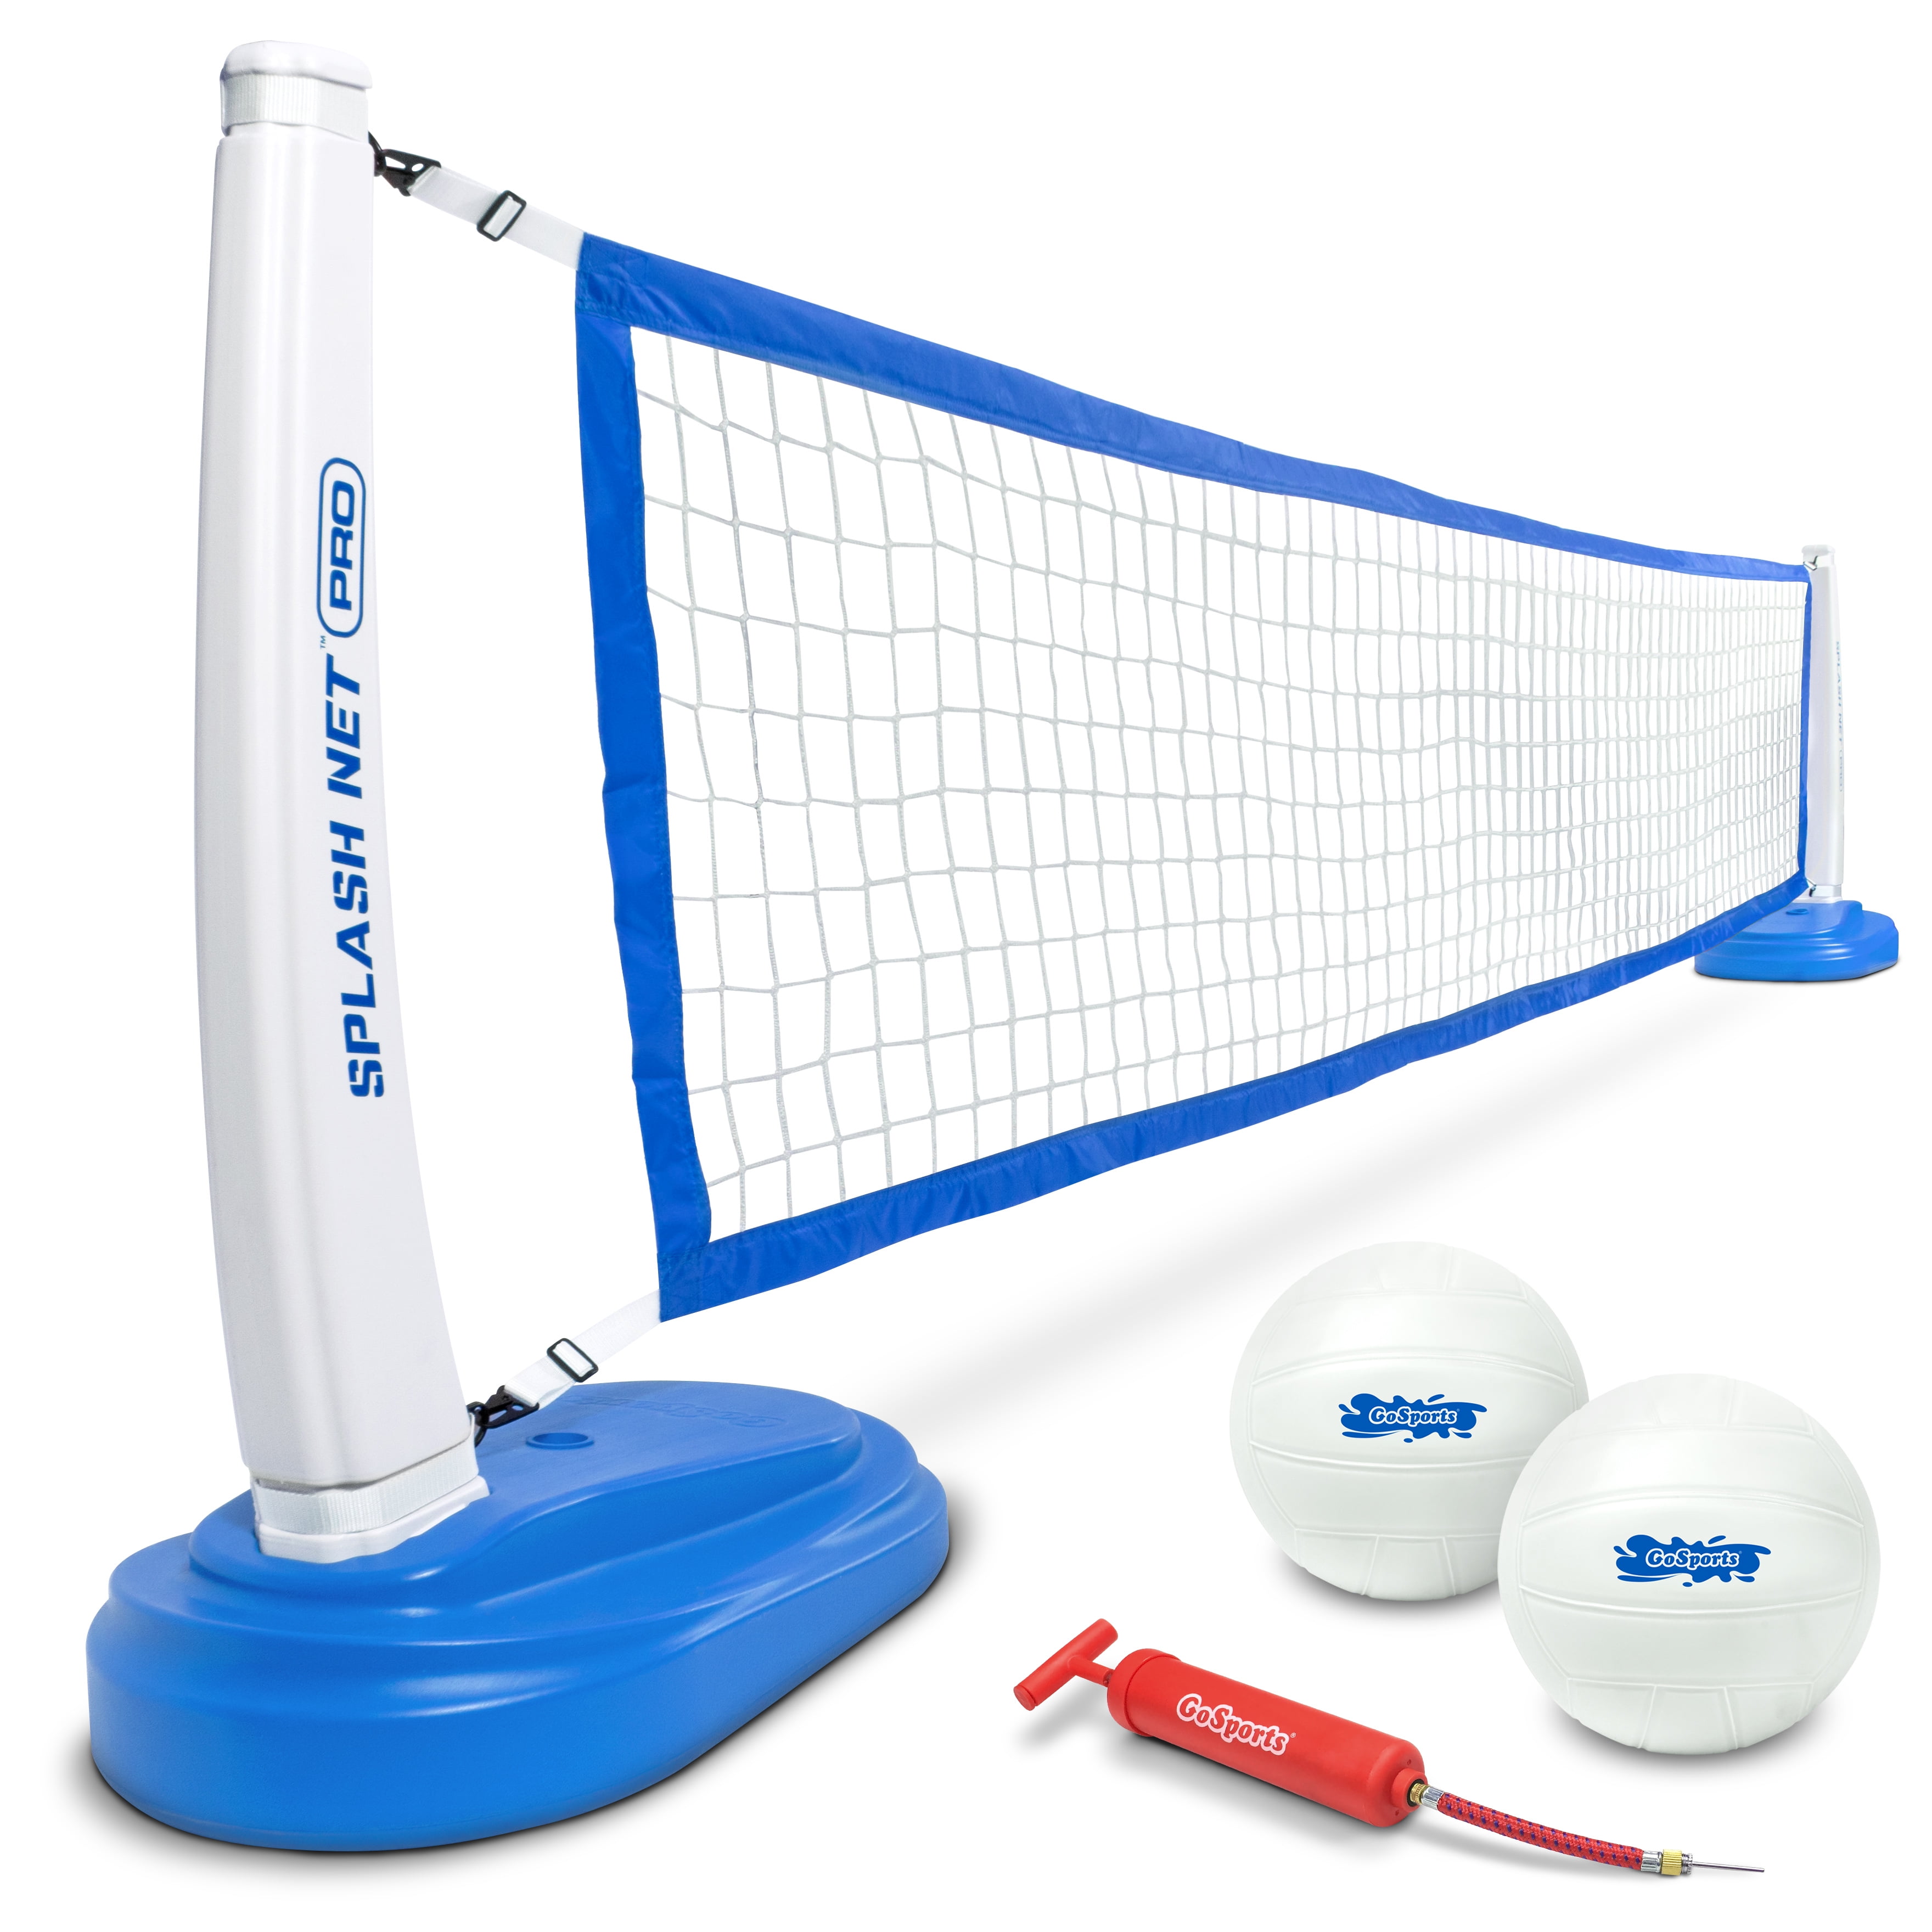 PK0006 White Skywalker Sports Volleyball with SS Logo and Pump